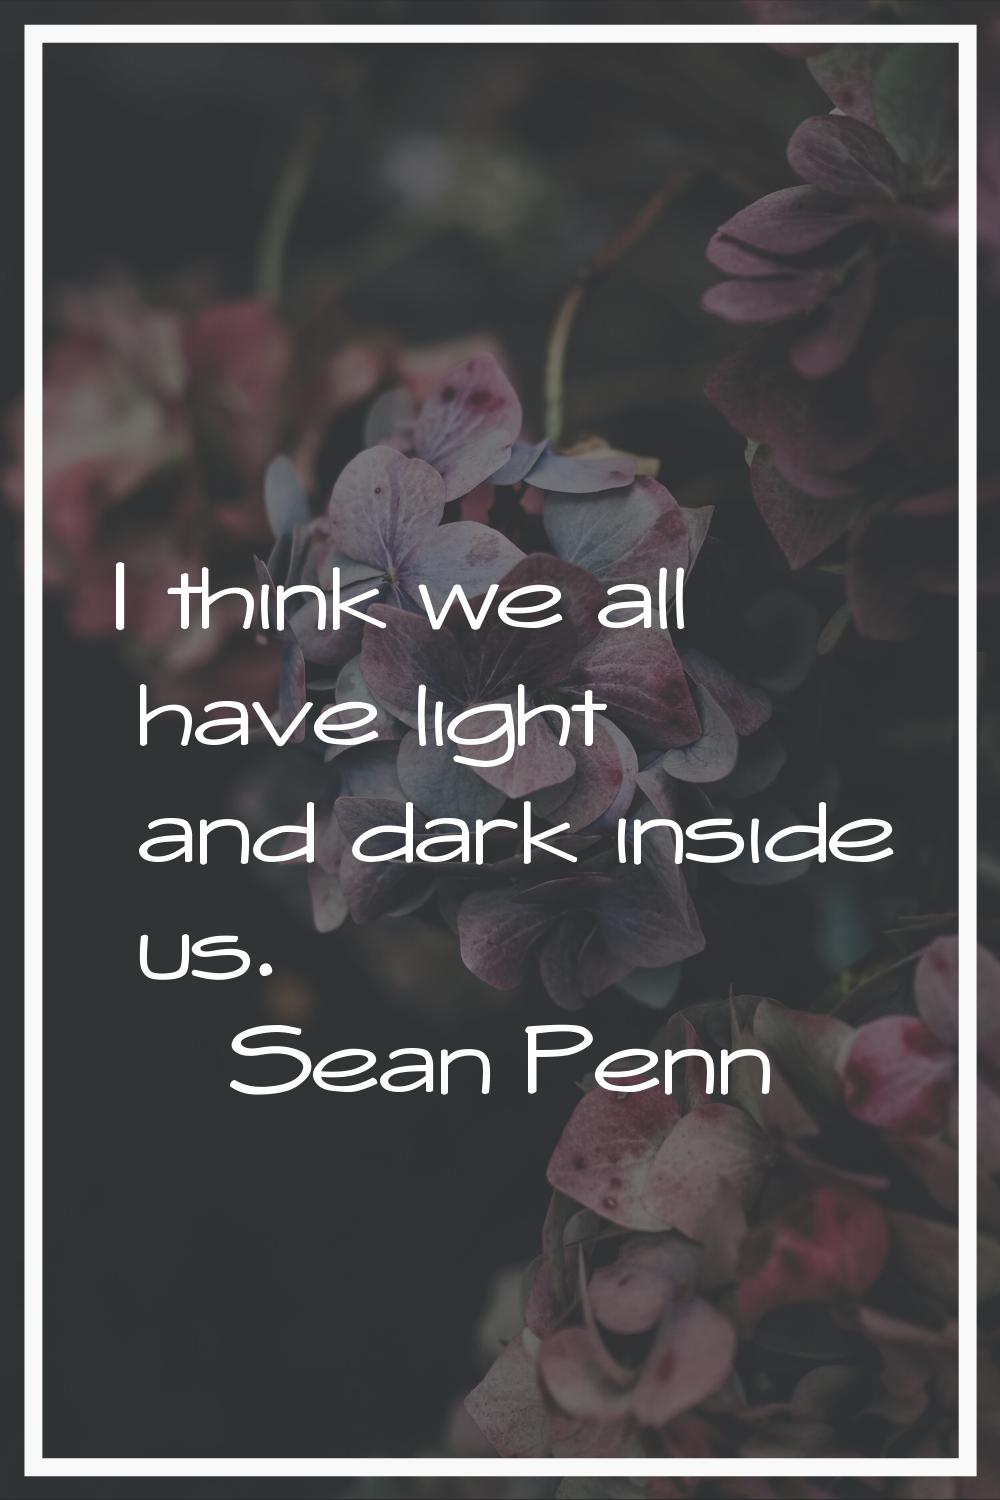 I think we all have light and dark inside us.